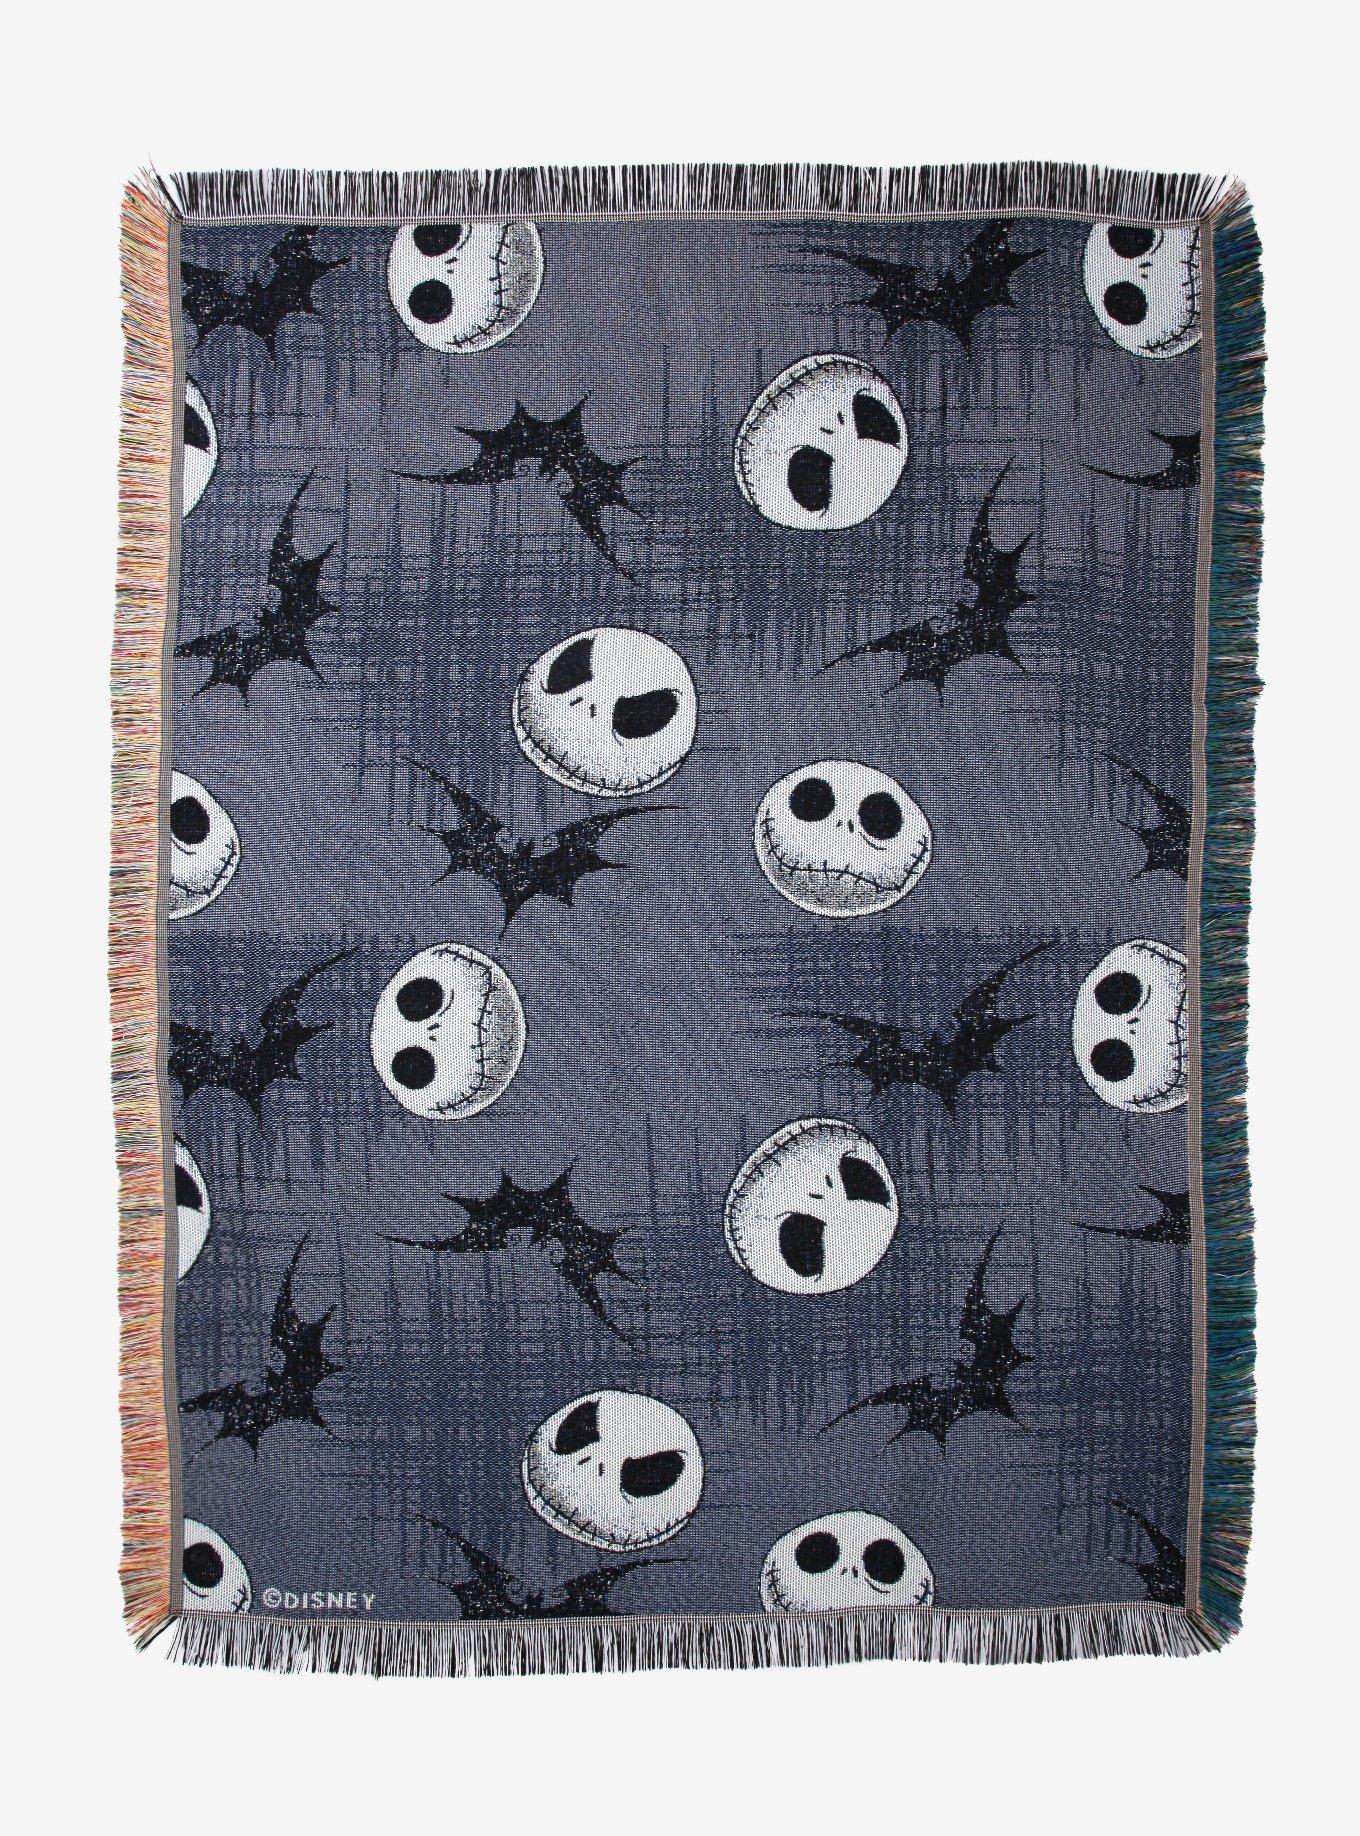 The Nightmare Before Christmas Jack Heads & Bats Tapestry Throw Blanket, , hi-res